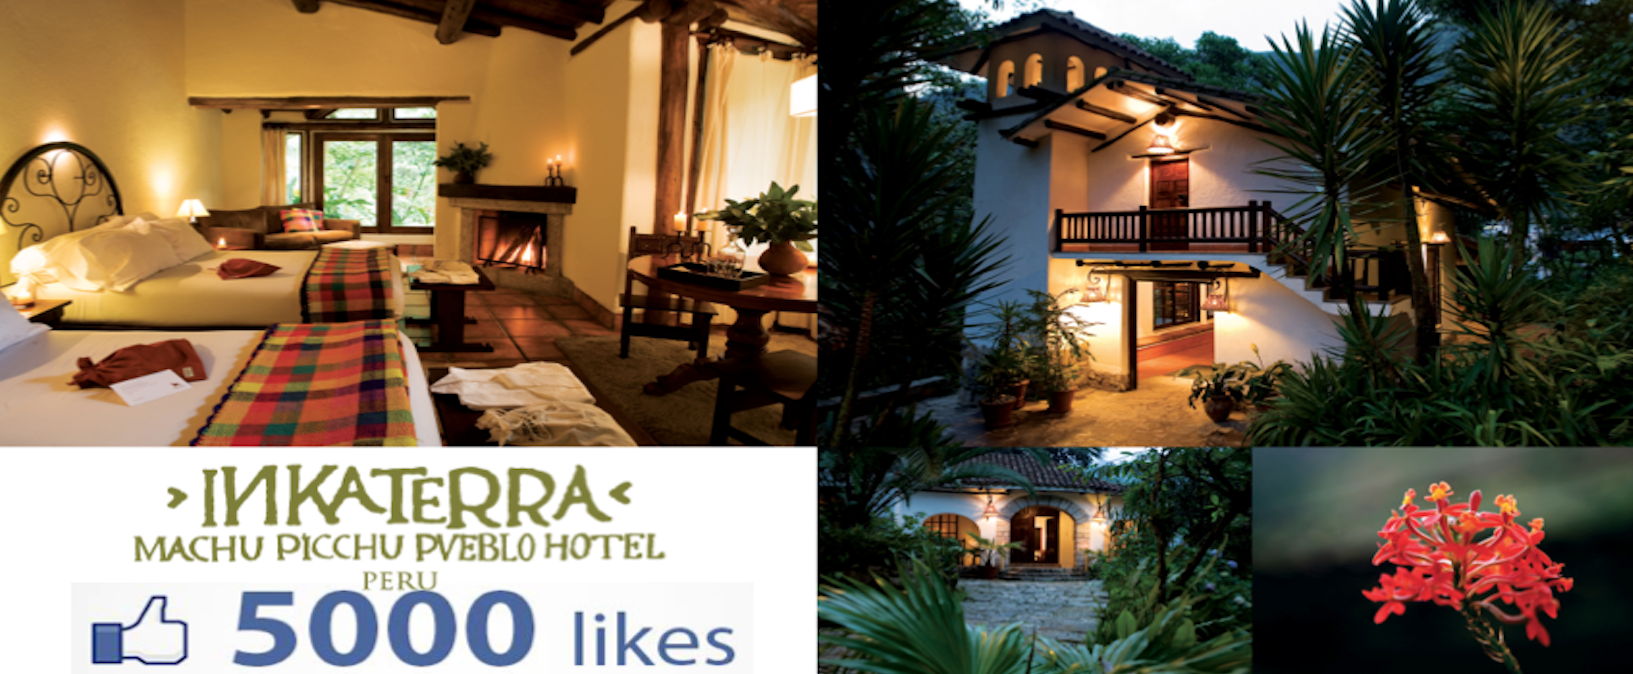 Inkaterra Facebook Page